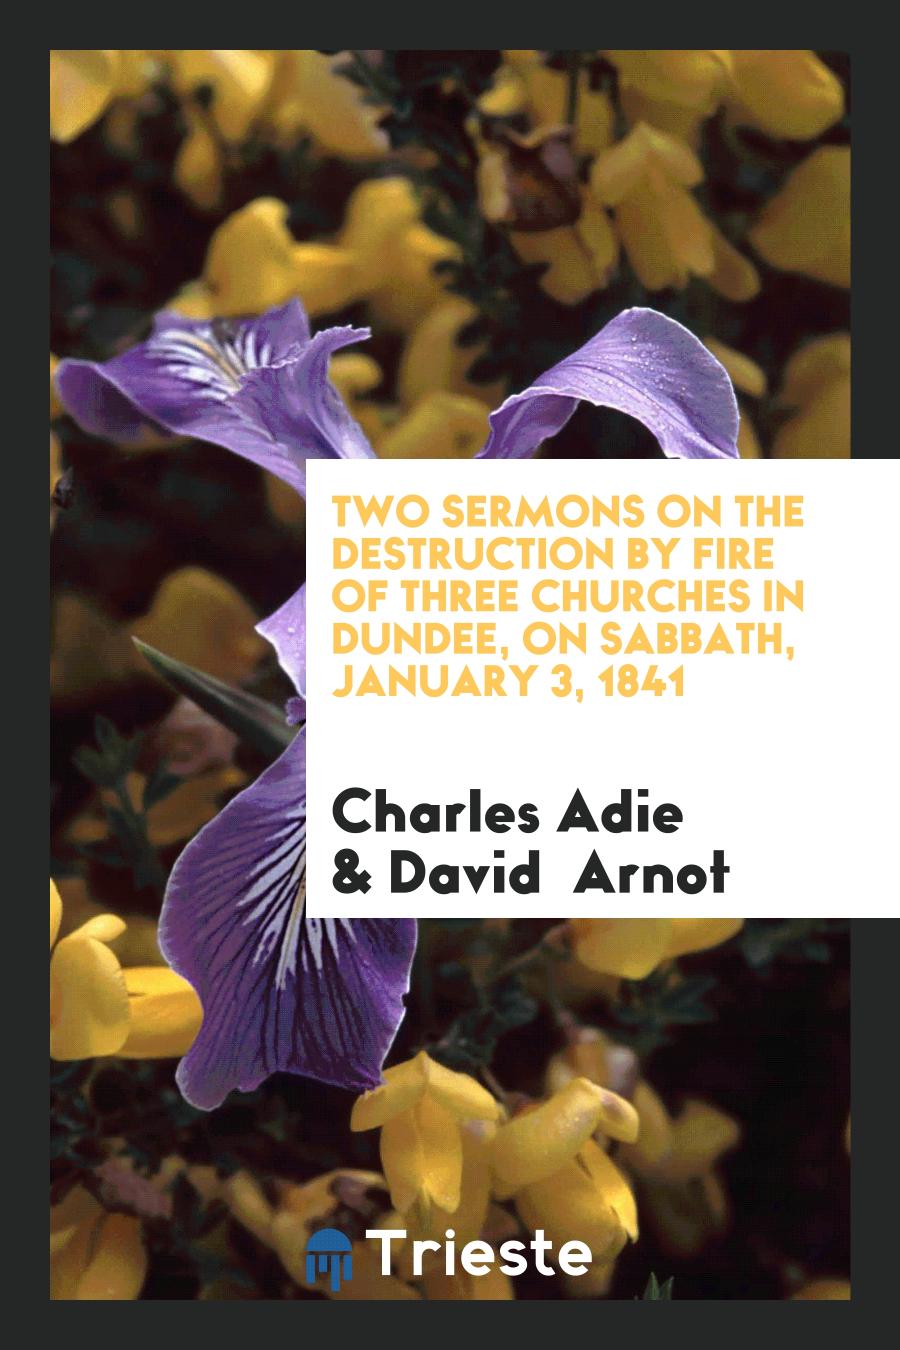 Two sermons on the destruction by fire of three churches in Dundee, on Sabbath, January 3, 1841